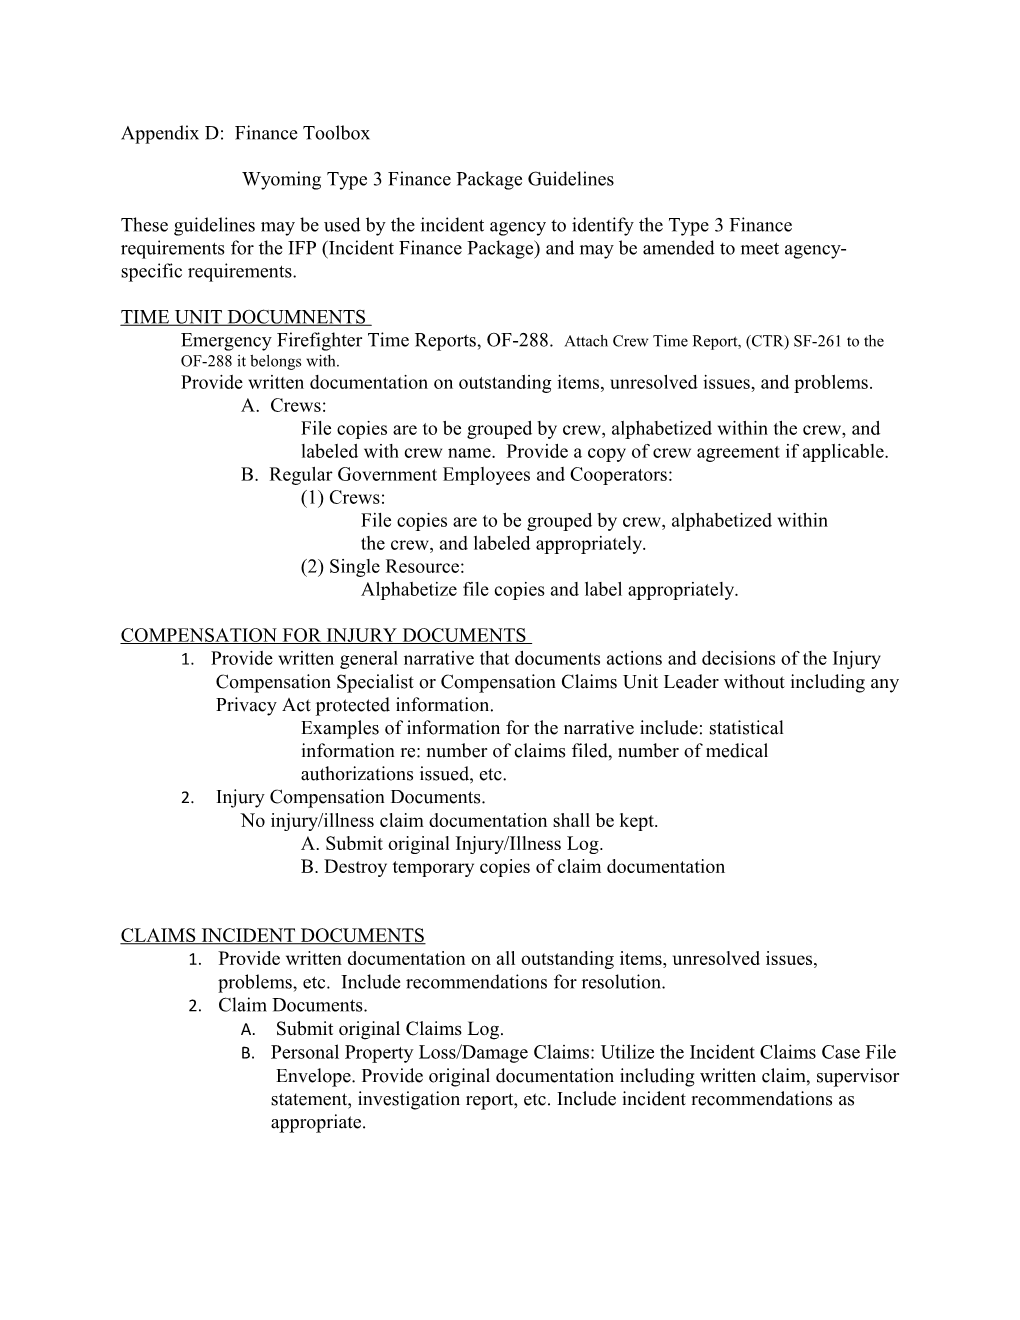 Wyoming Type 3 Finance Package Guidelines